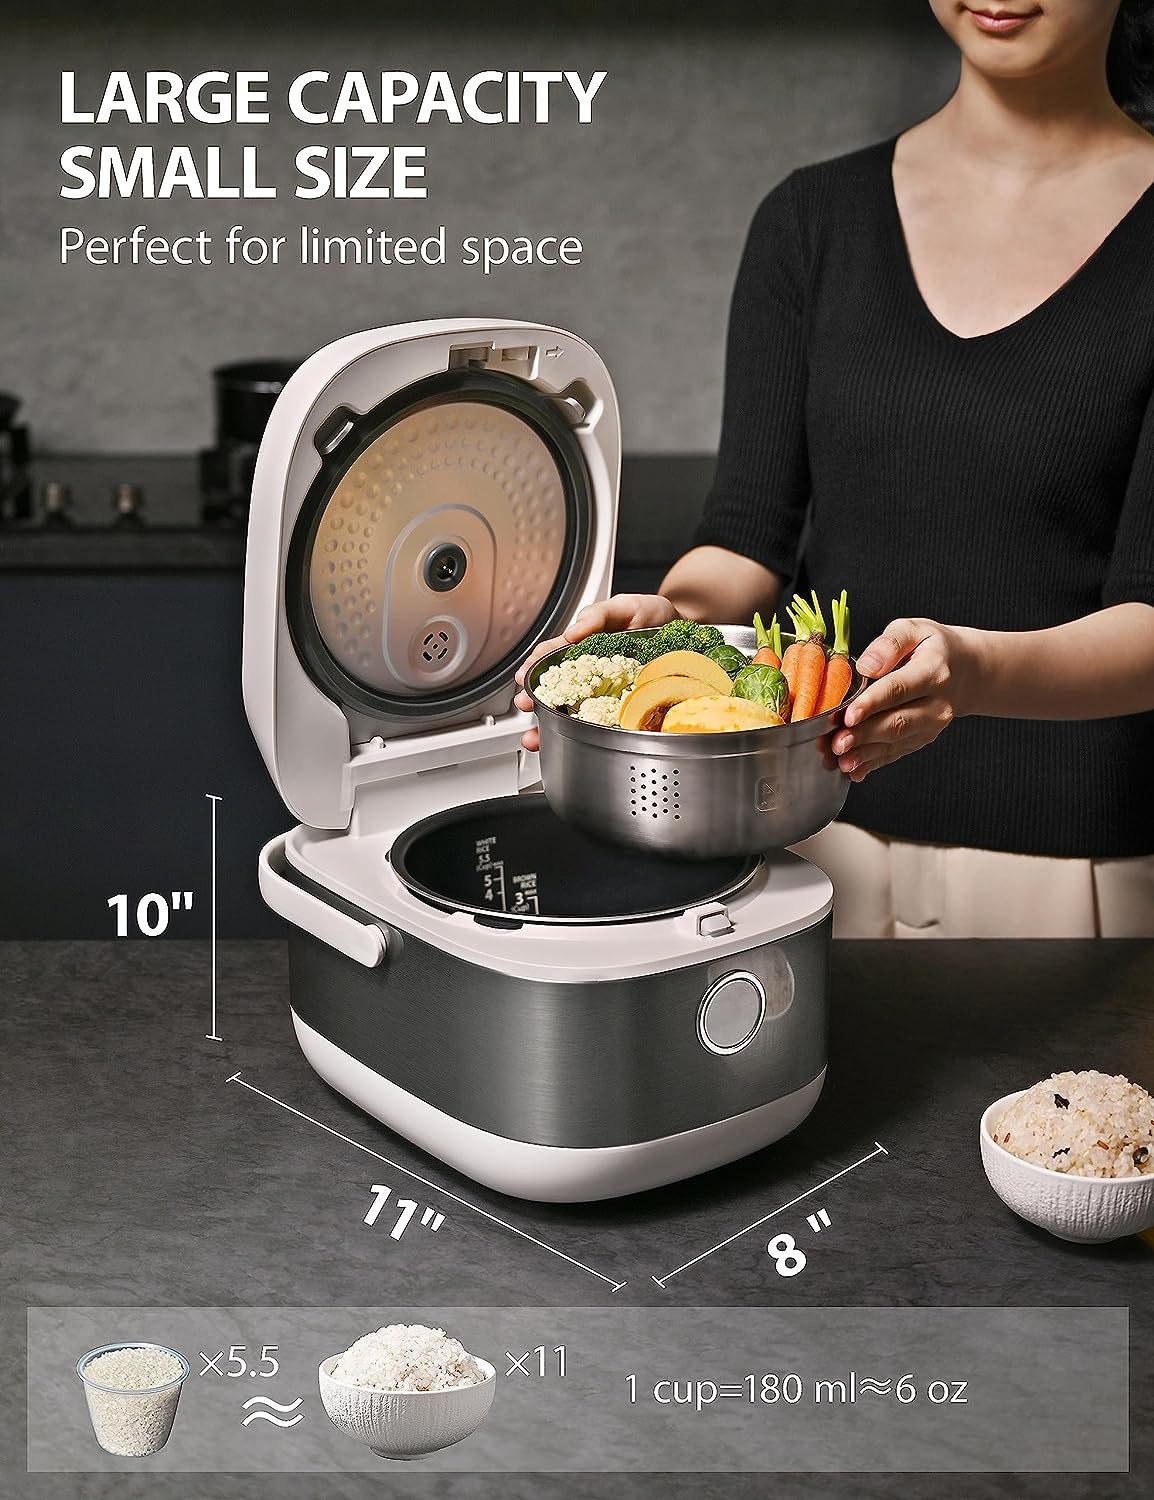 https://bigbigmart.com/wp-content/uploads/2023/08/Toshiba-Induction-Low-Carb-Rice-Cooker-Steamer-5.5-Cups-Uncooked-%E2%80%93-Japanese-Rice-Cooker-with-Fuzzy-Logic-Technology-8-Cooking-Functions-24-Hr-Timer-and-Auto-Keep-Warm-White5.jpg